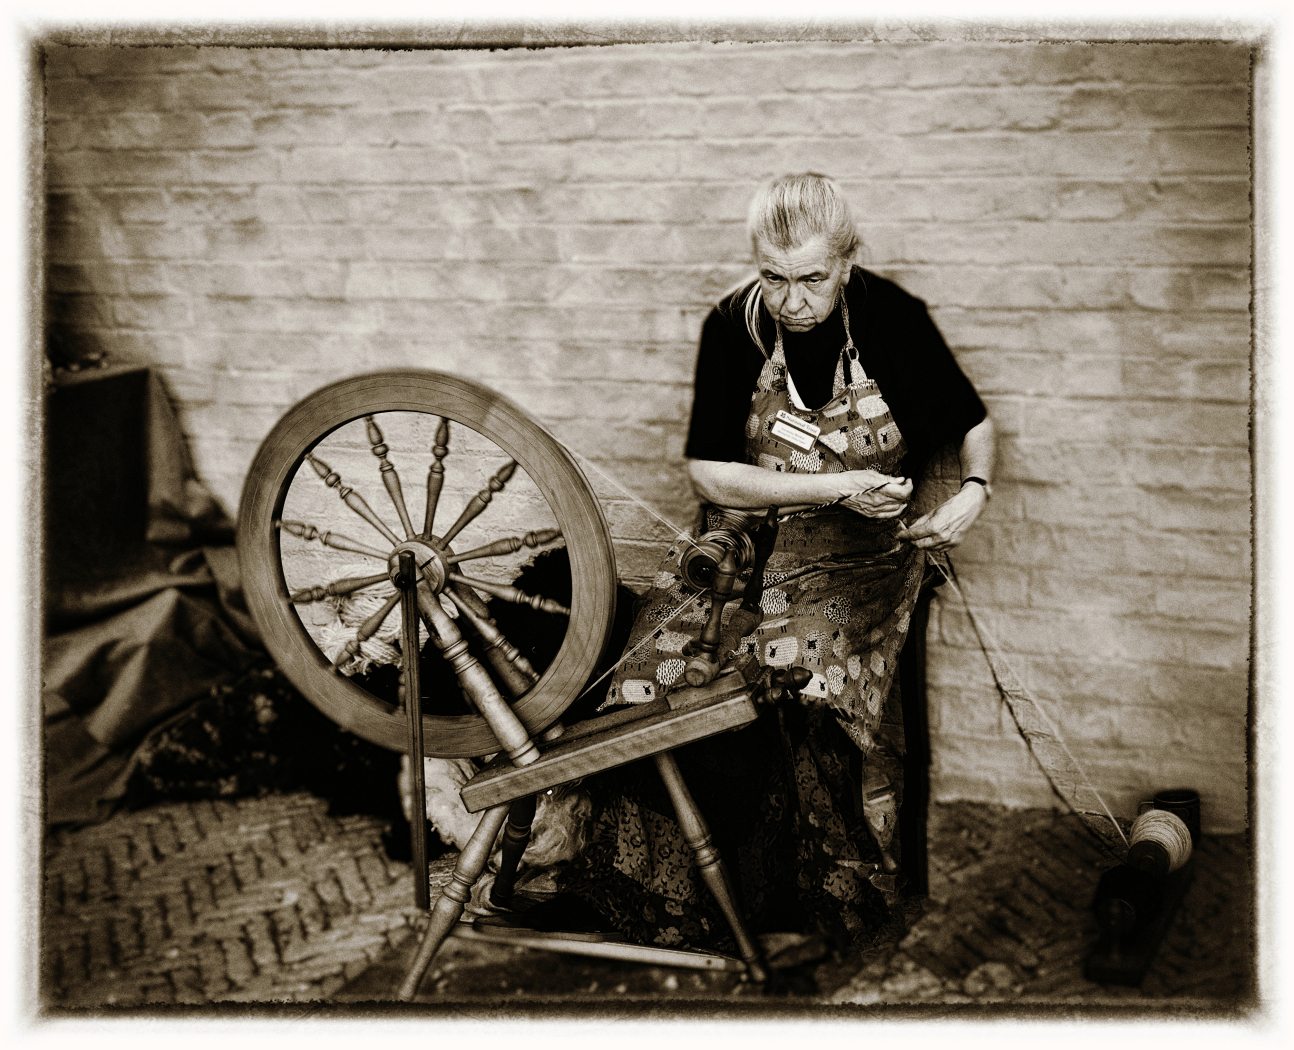 Wool spinning at Wimpole